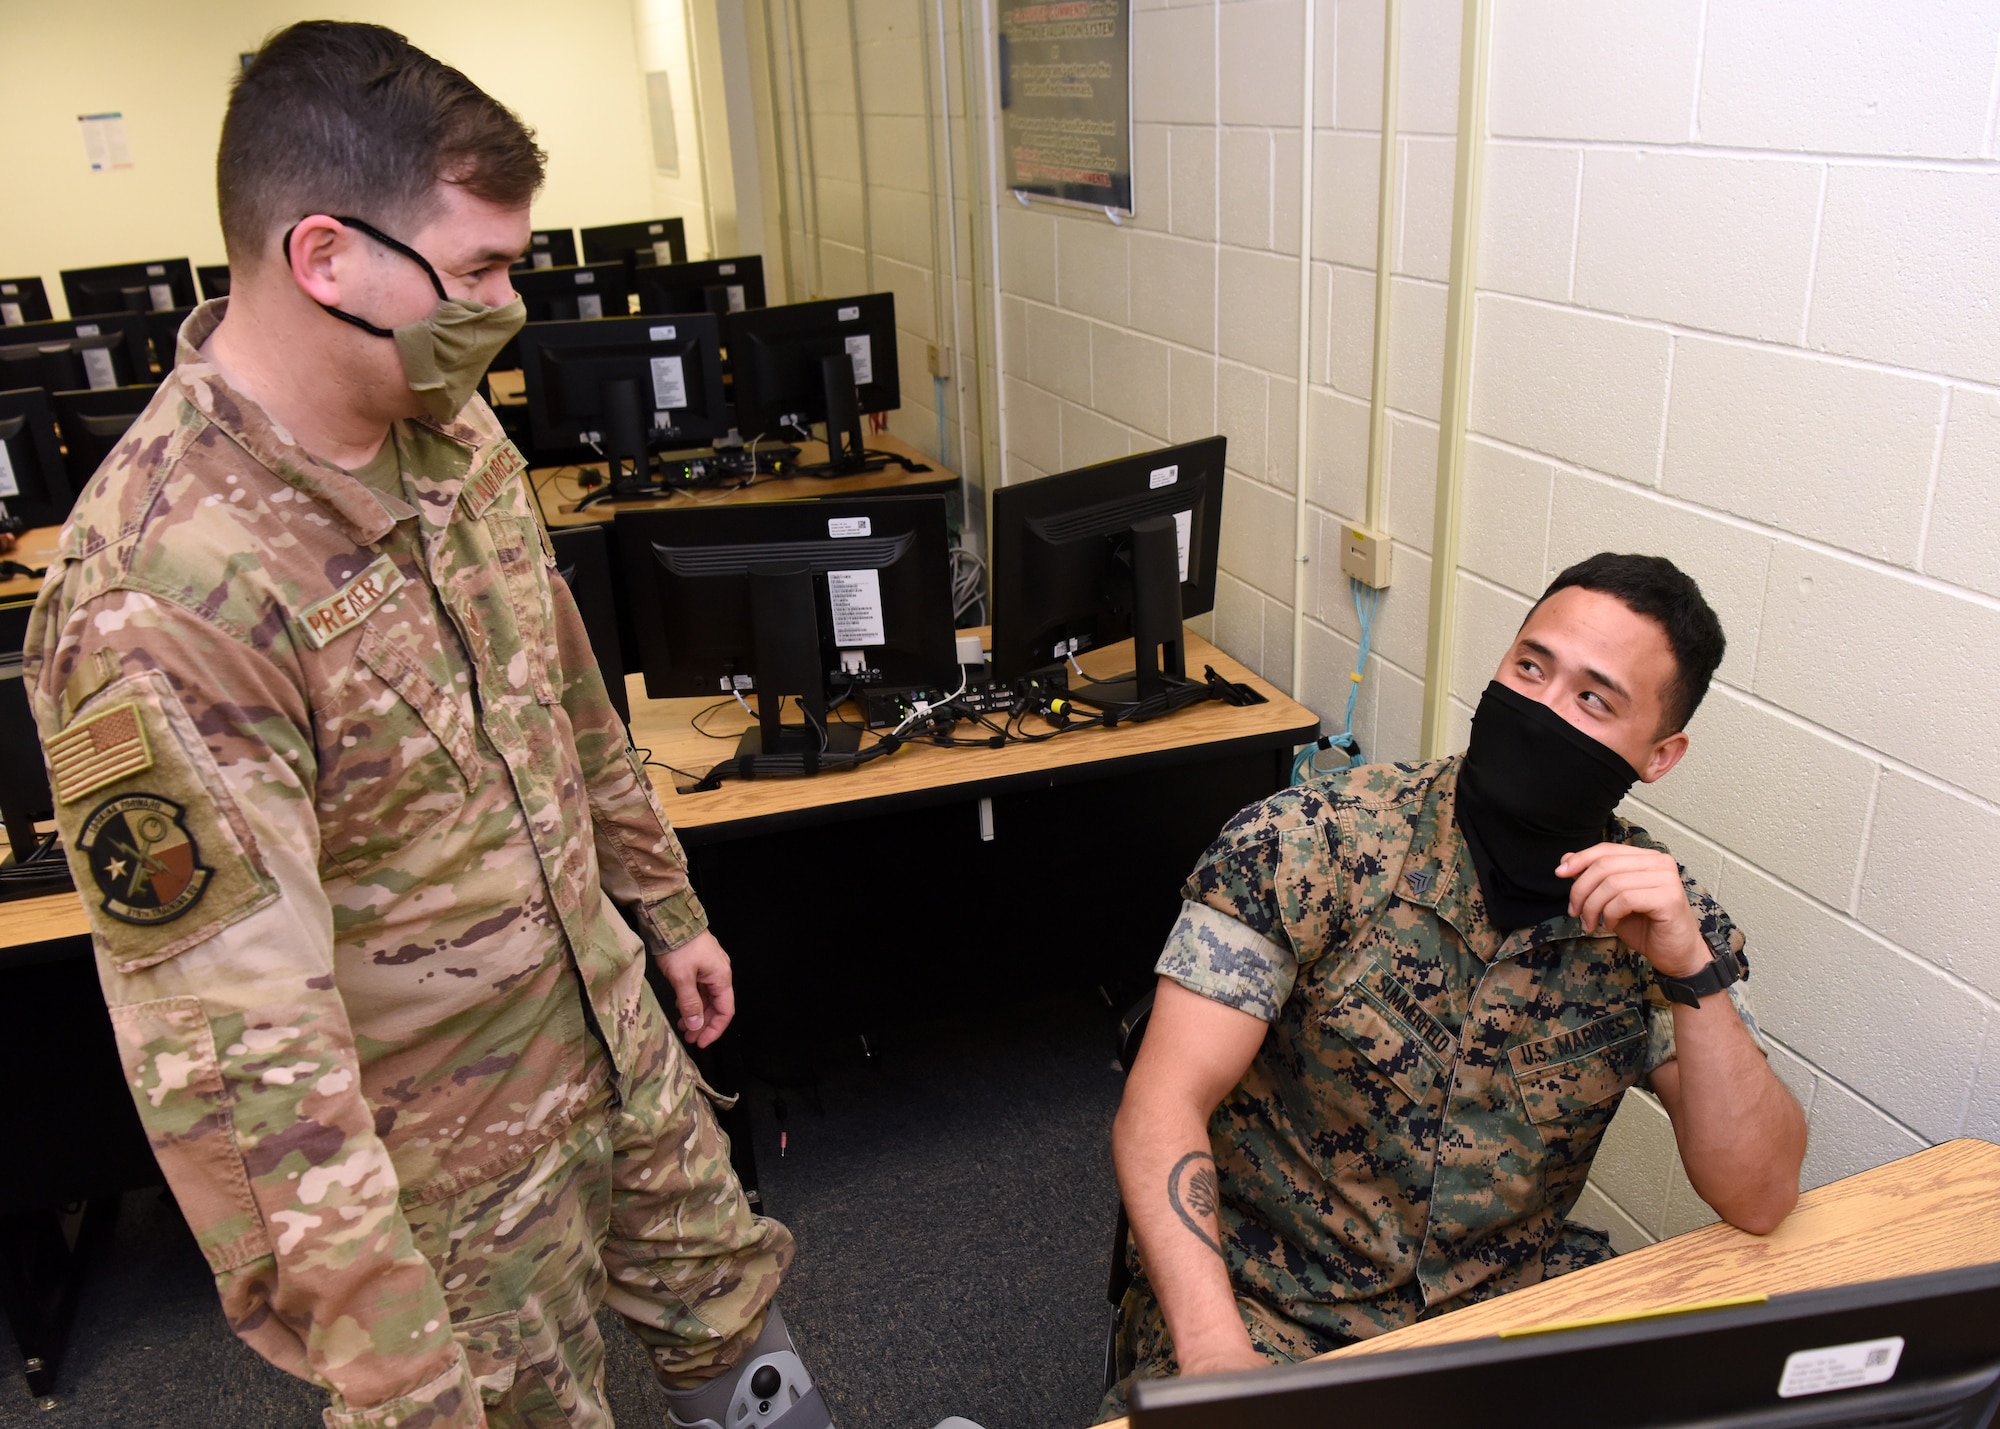 U.S. Air Force Staff Sgt. Jonathan Preiser, 316th Training Squadron instructor, engages with Marine Corps Staff Sgt. Terry Summerfield, Marine Corps Detachment student, during the in-classroom portion of the Apprentice Electronic Signals Intelligence Analyst (1N2A) course inside Fred Sebers Hall on Goodfellow Air Force Base, Texas, April 20, 2020. The classroom complied with the 17th Training Wing and federal safety regulations during the COVID-19 pandemic and shifted two-thirds of its material to digital. (U.S. Air Force Photo by Airman 1st Class Abbey Rieves)